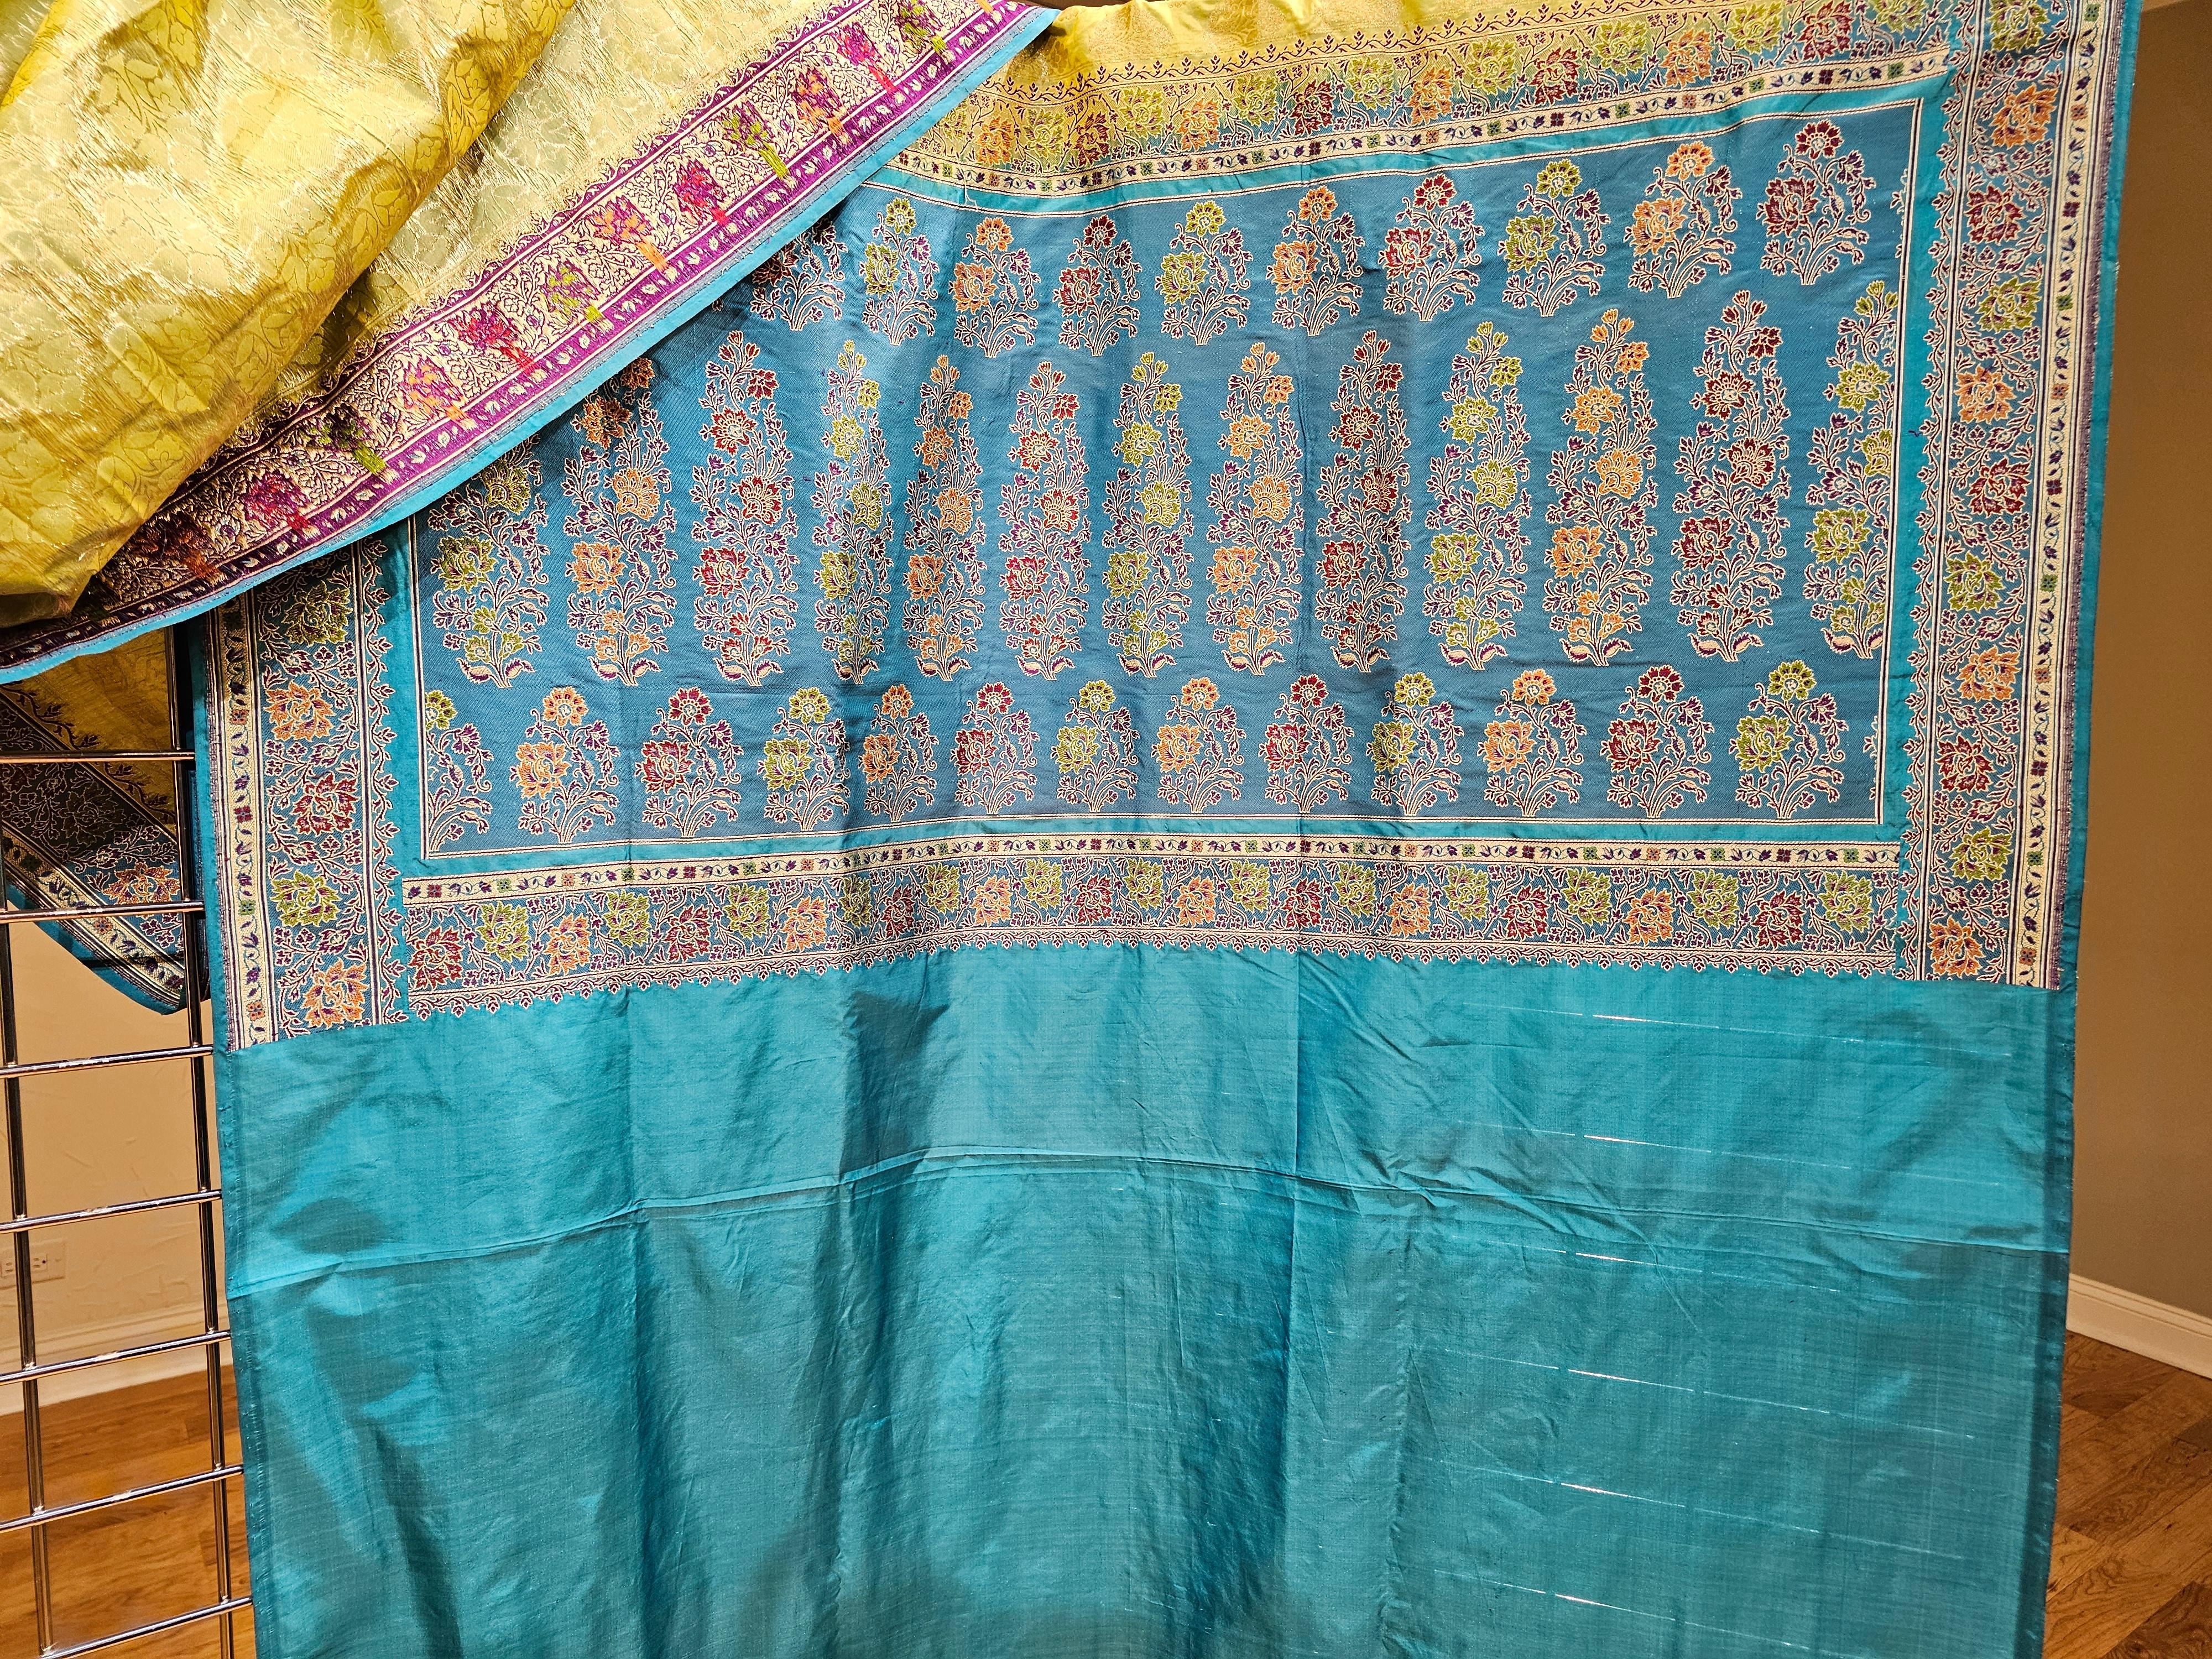 Vintage Brocade Silk Textile in Paisley Pattern in Blue, Pale Green, Gold In Good Condition For Sale In Barrington, IL